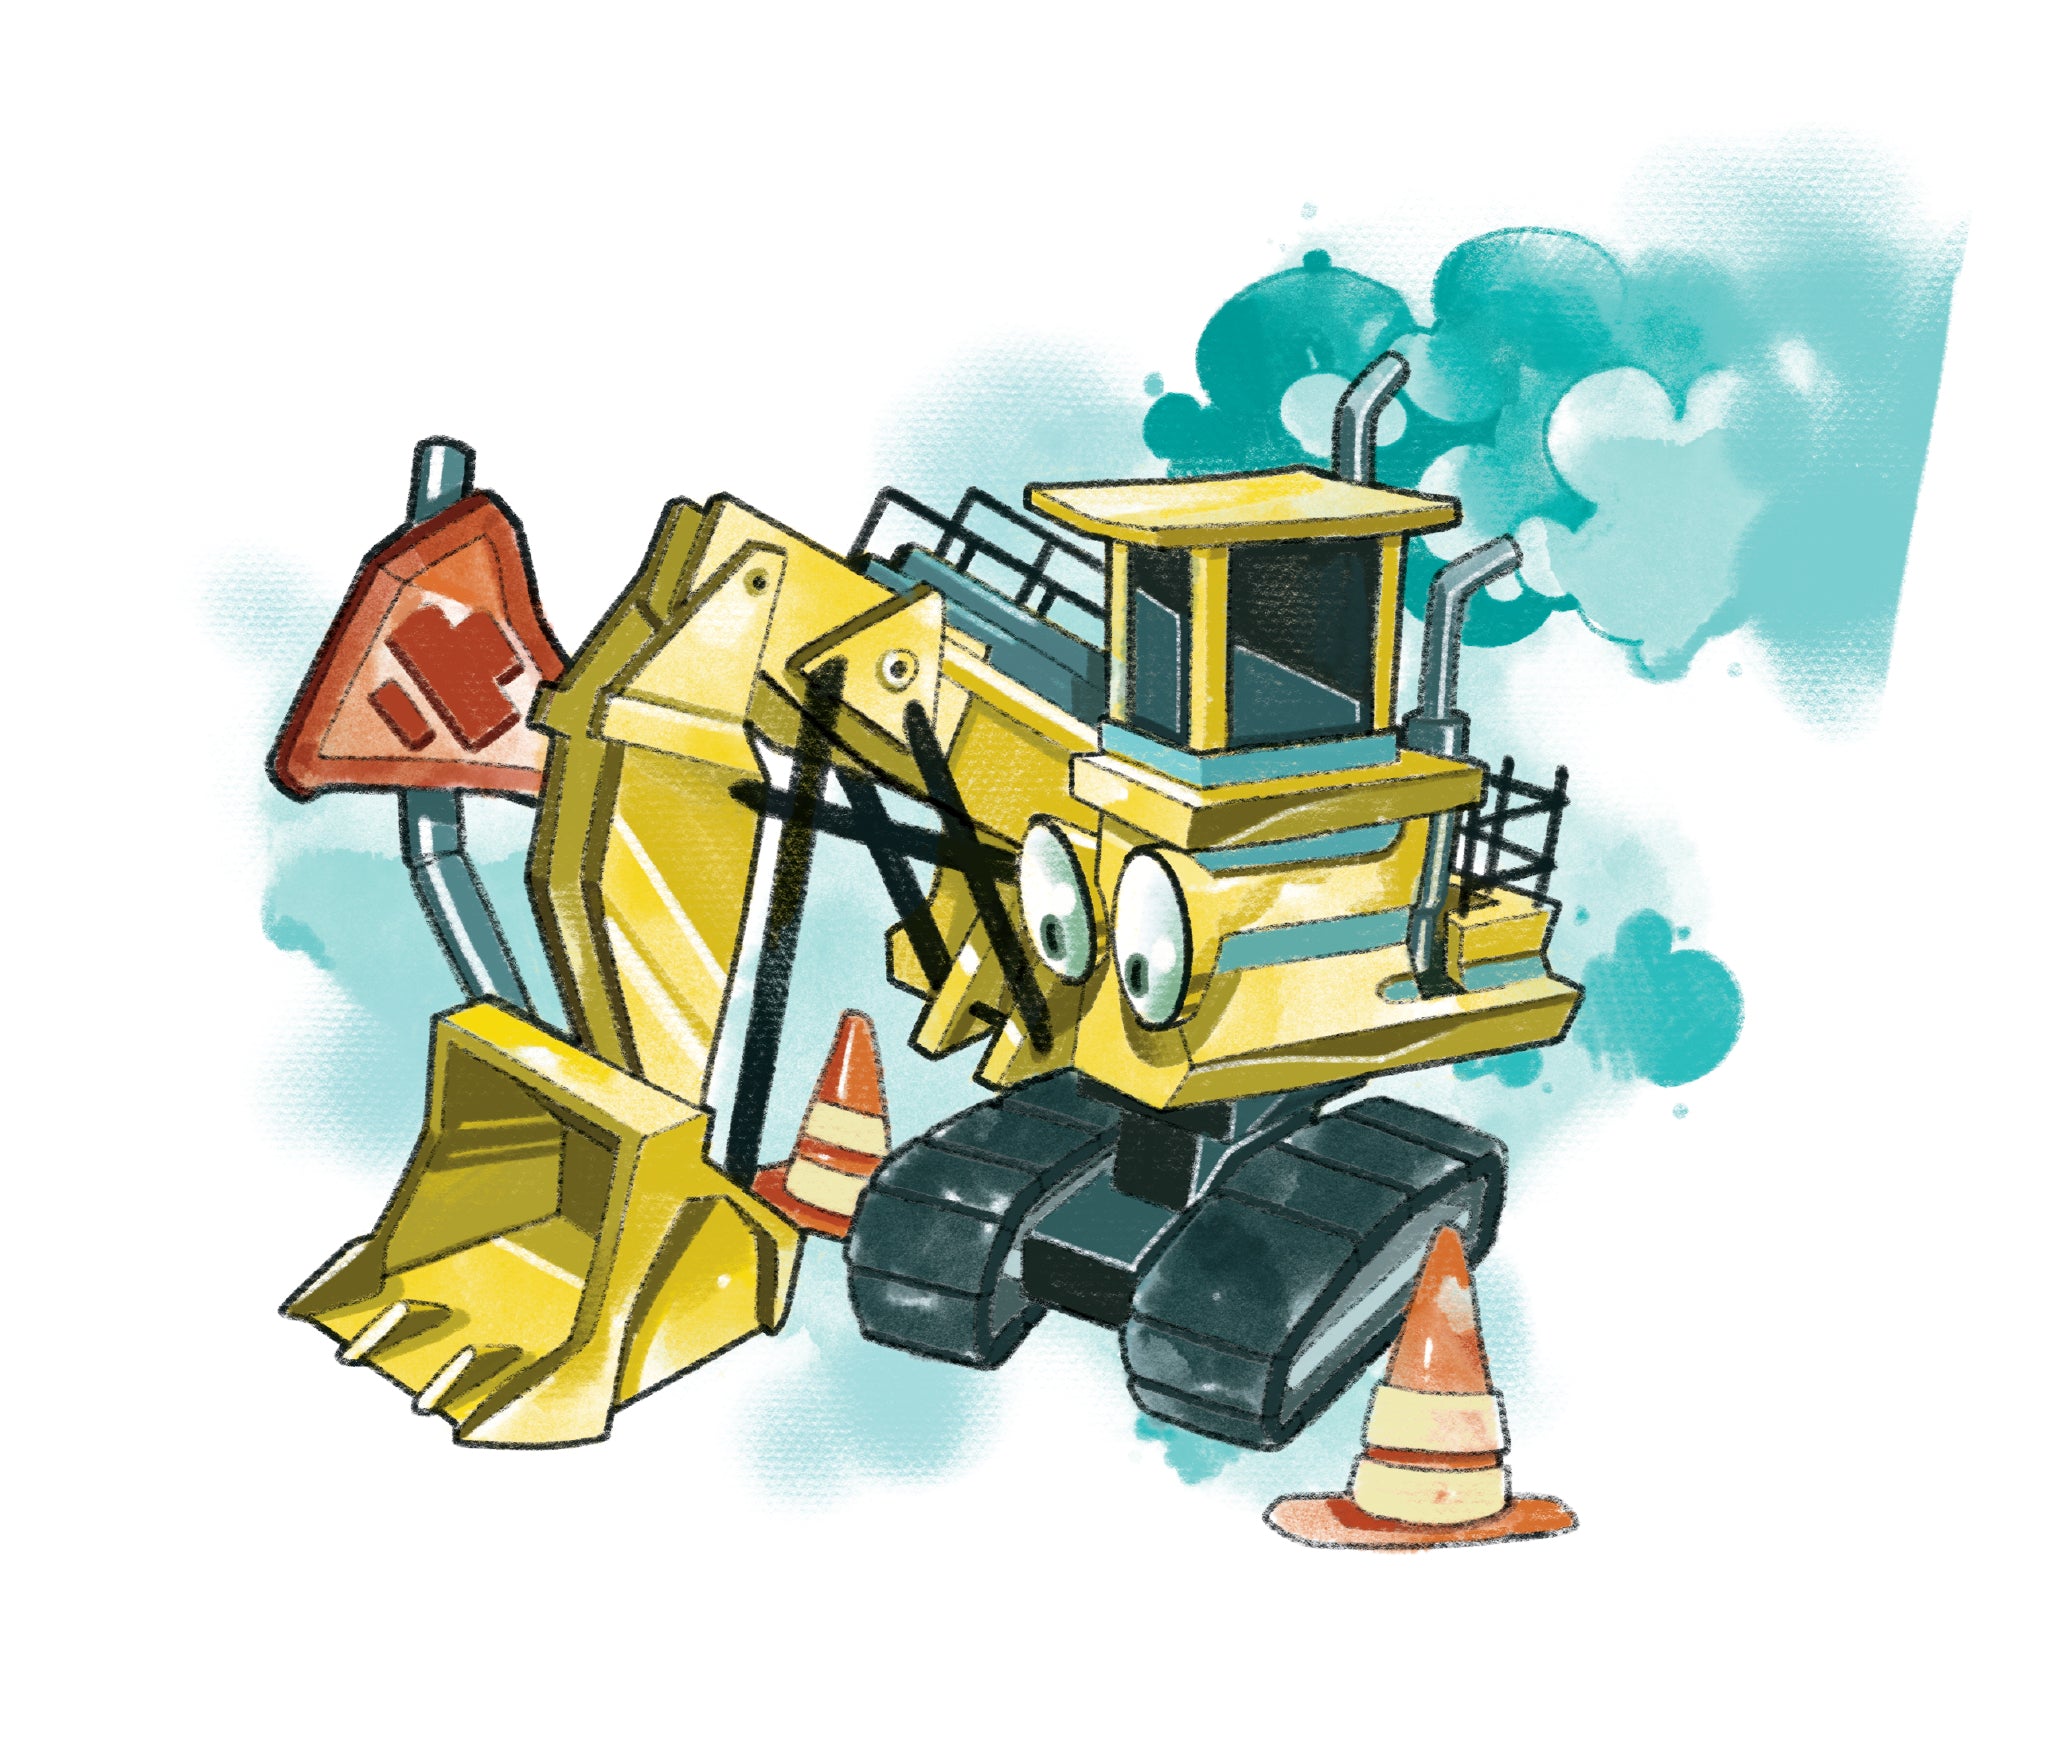 Full design of lower temporary tattoo sleeve with construction equipment.